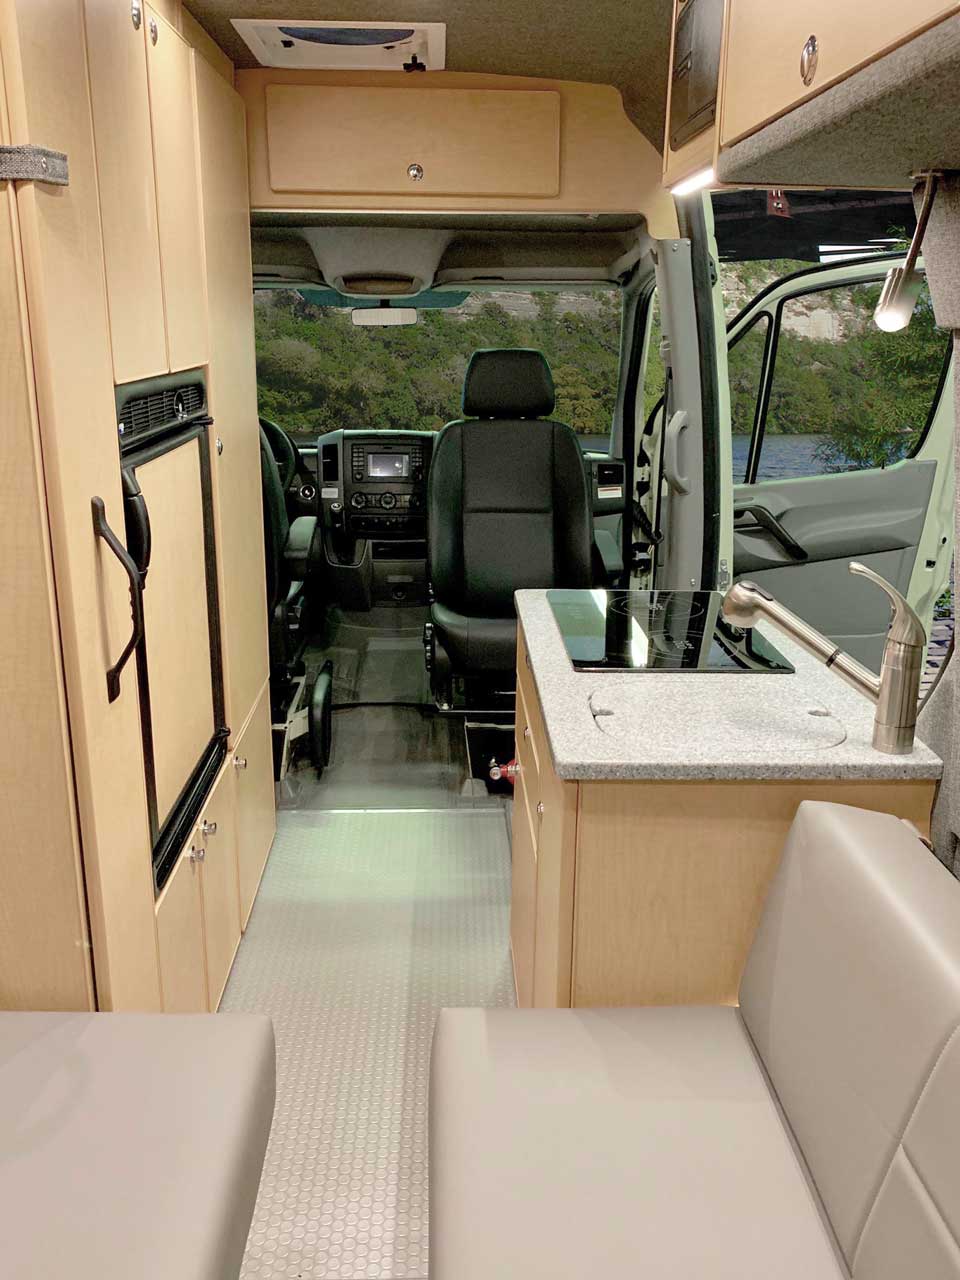 Dining and sleeping areas in the rear of the van.